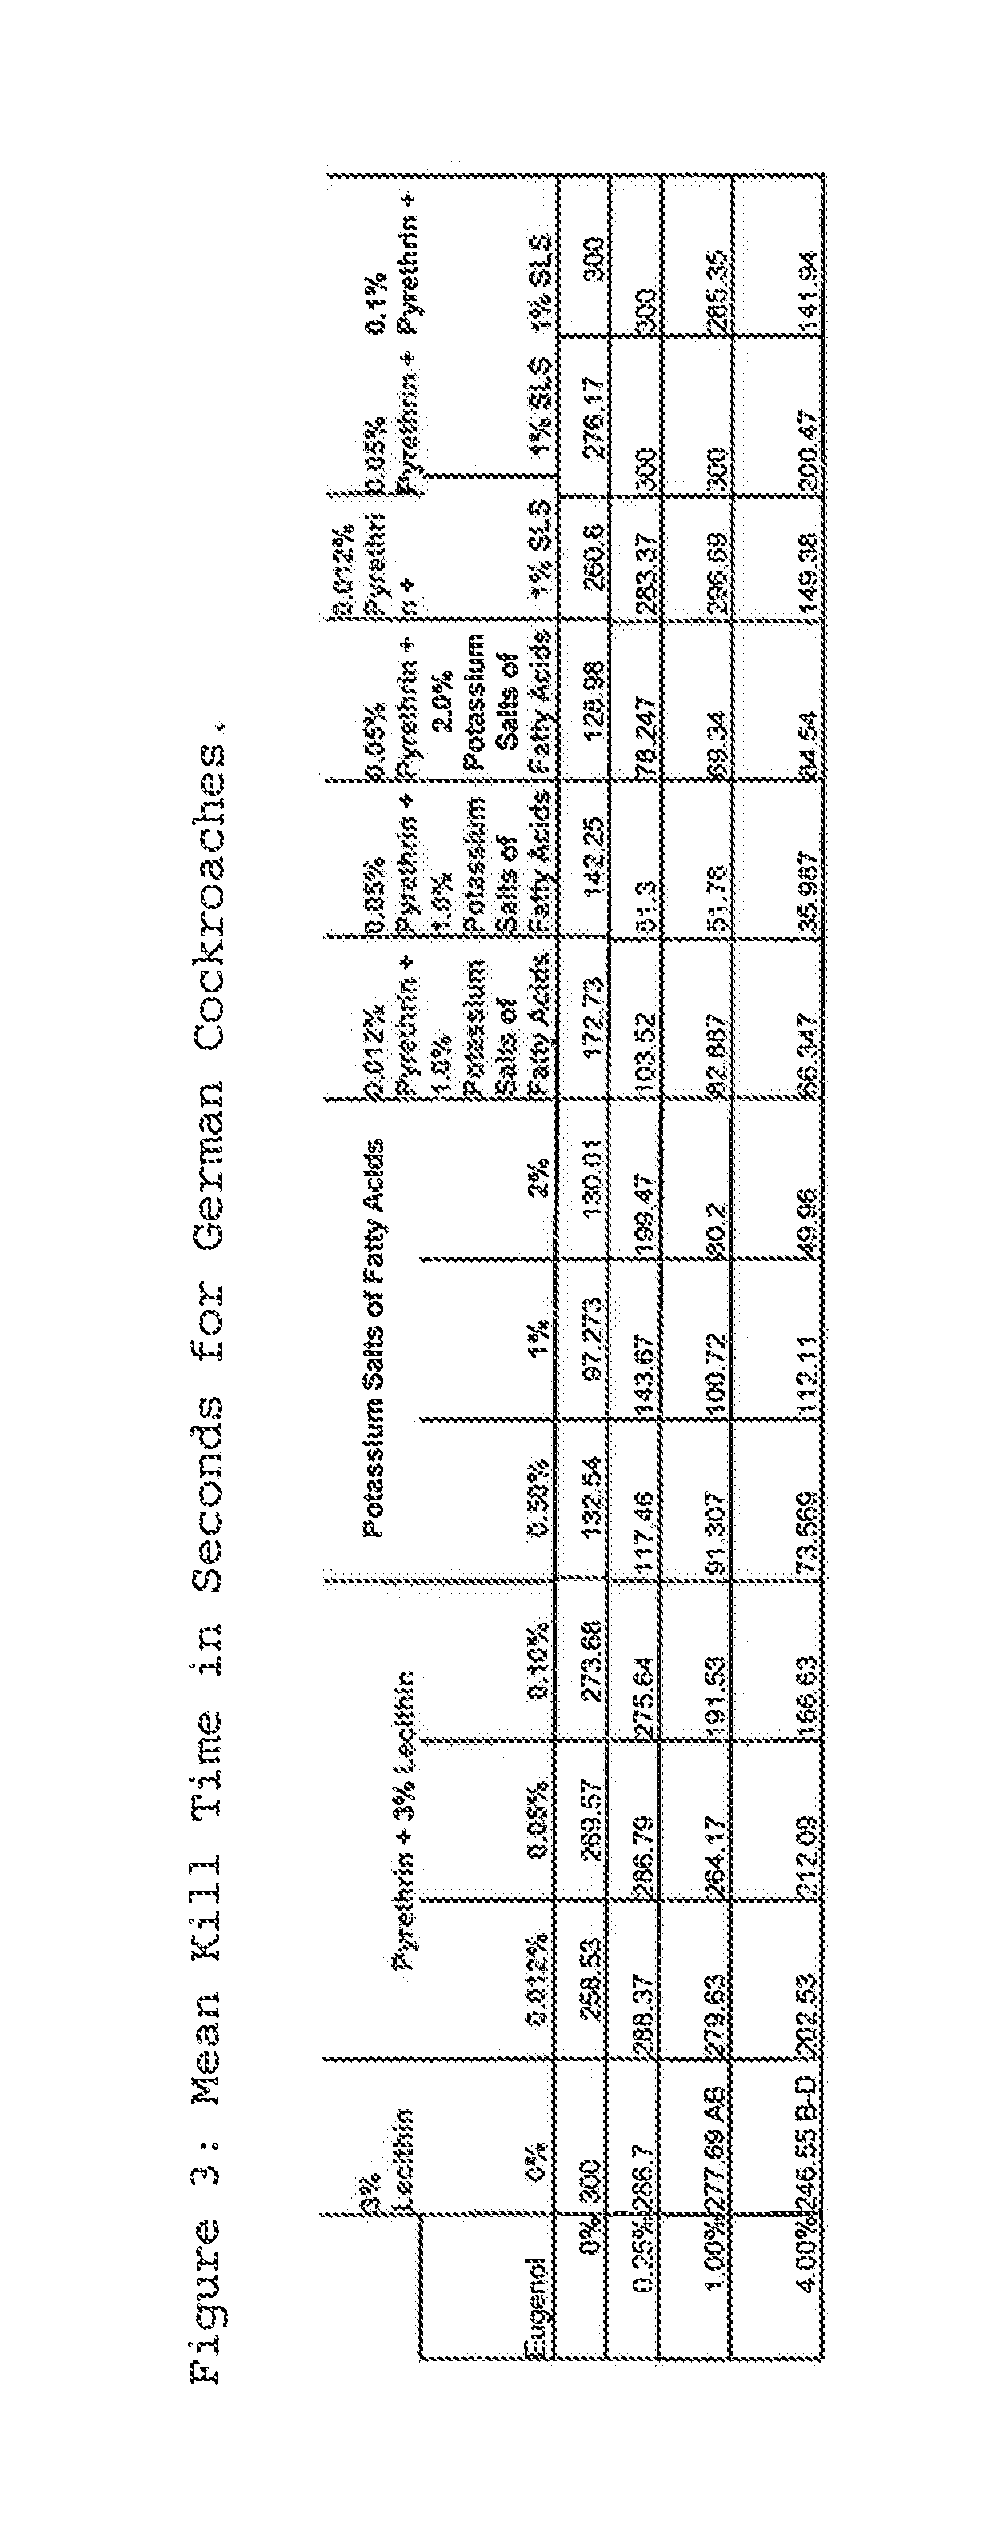 Insecticidal compositions and methods of using same